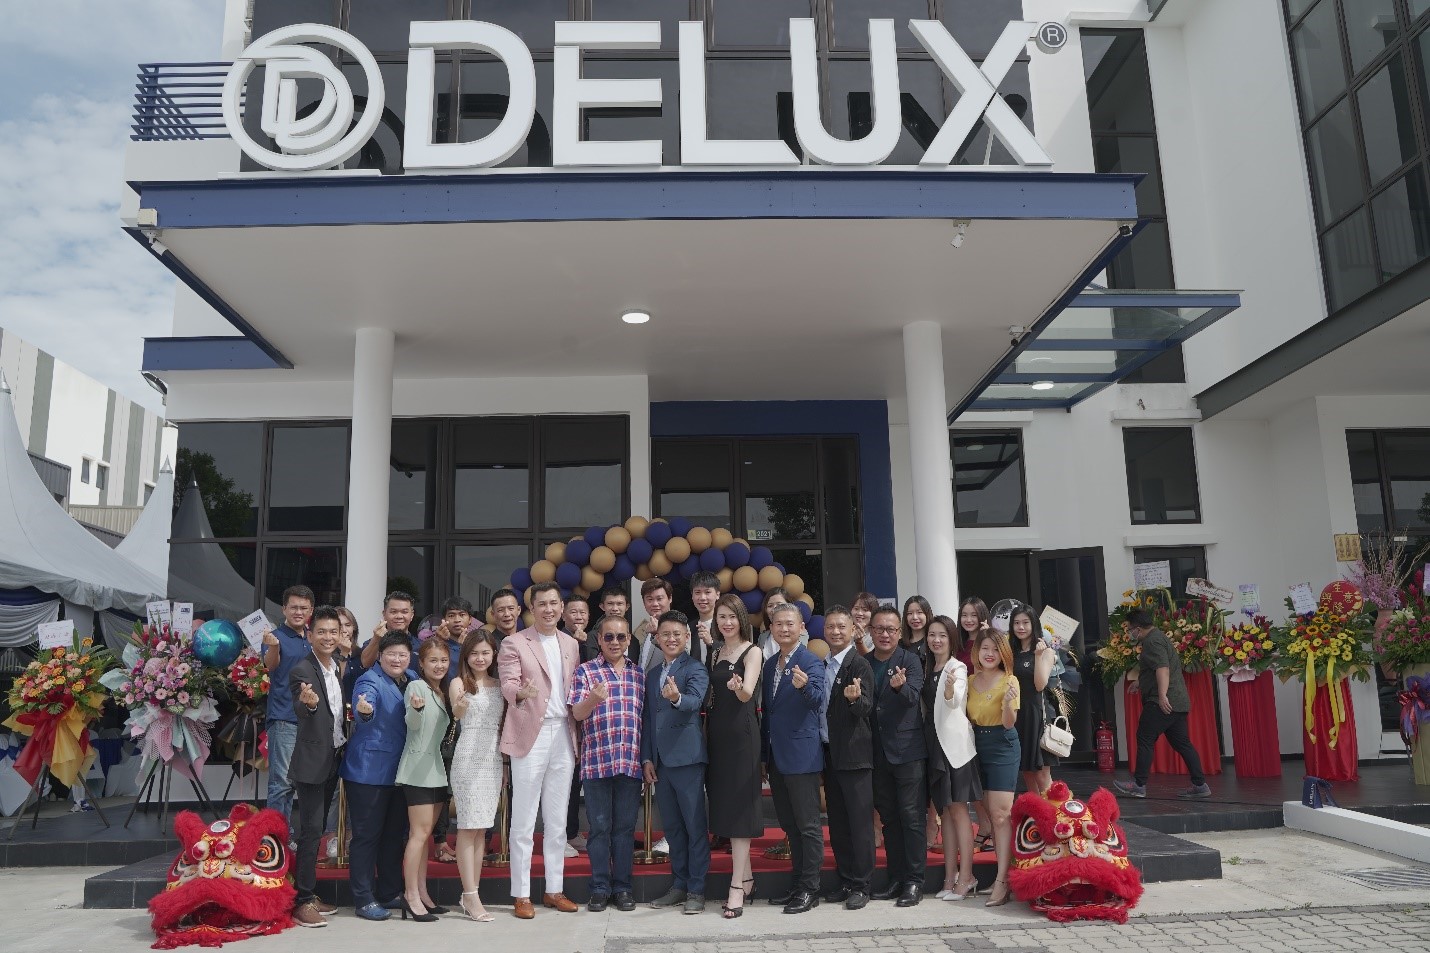 DELUX Unveiled Its Largest Showroom in Johor, Delux